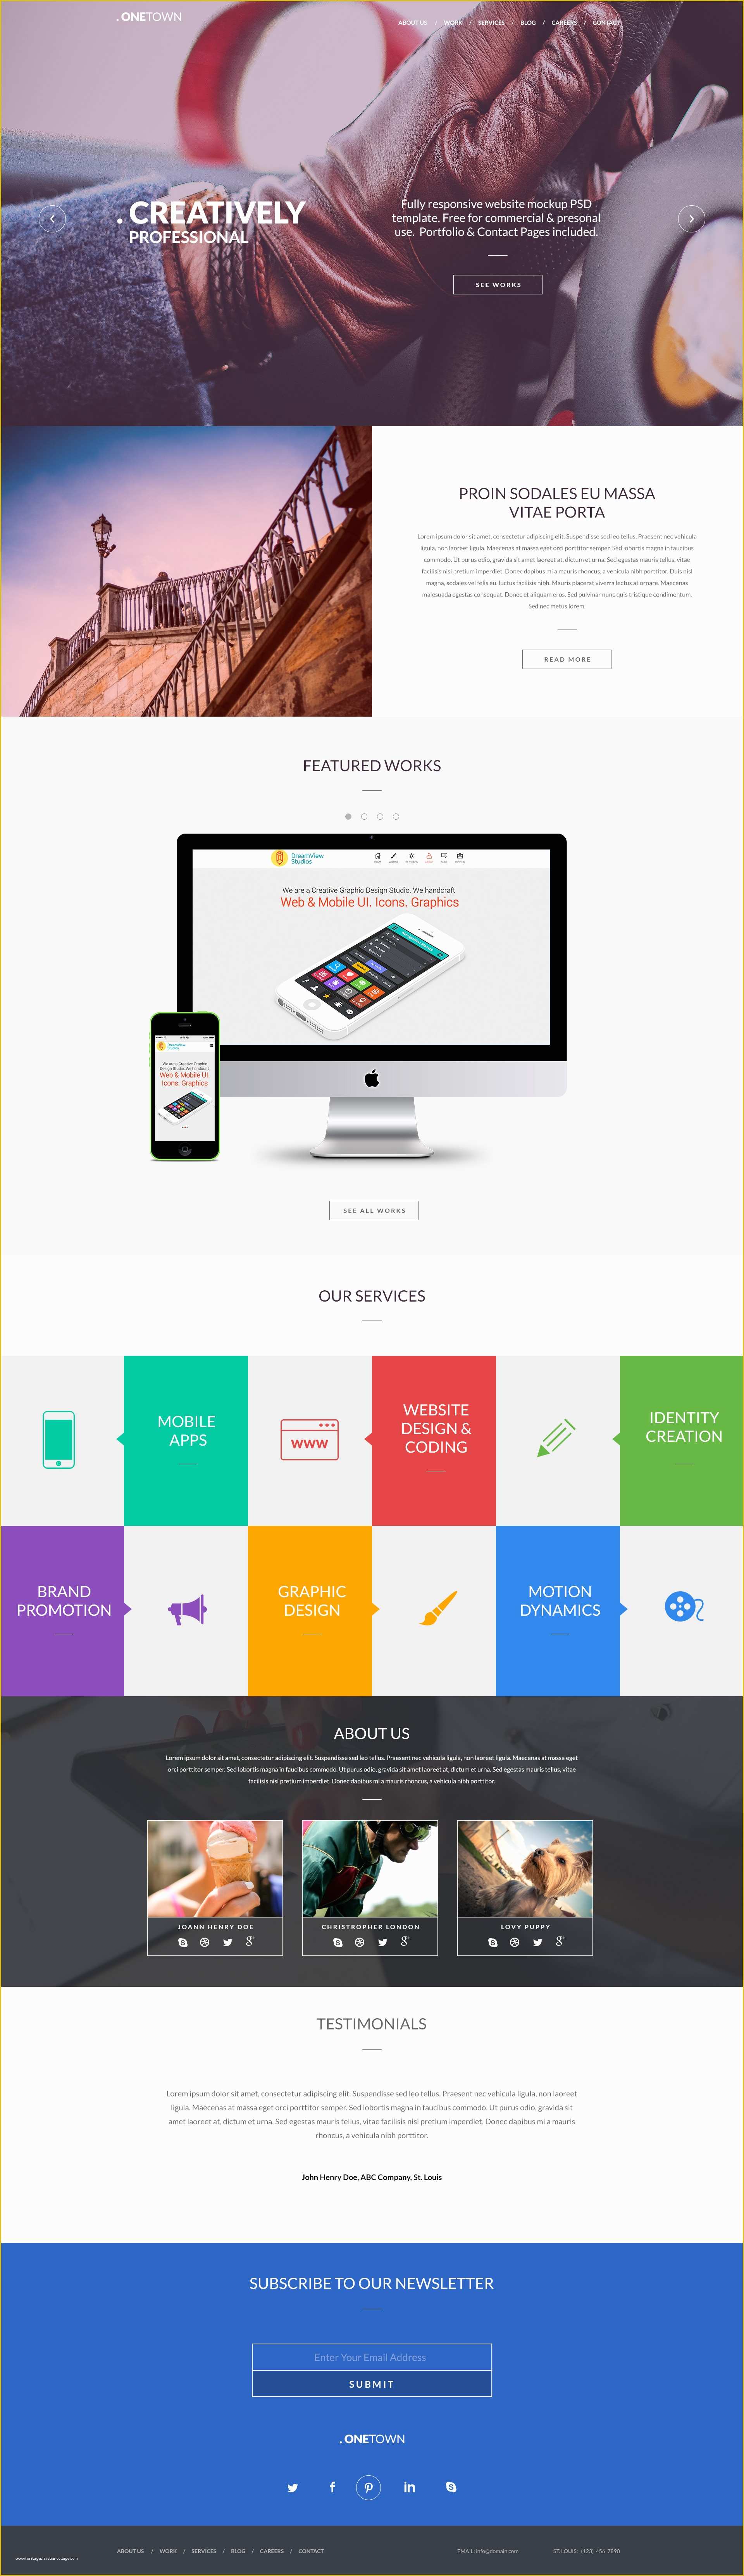 Responsive Website Templates Psd Free Download Of Free Responsive Website Psd Templates Graphicsfuel